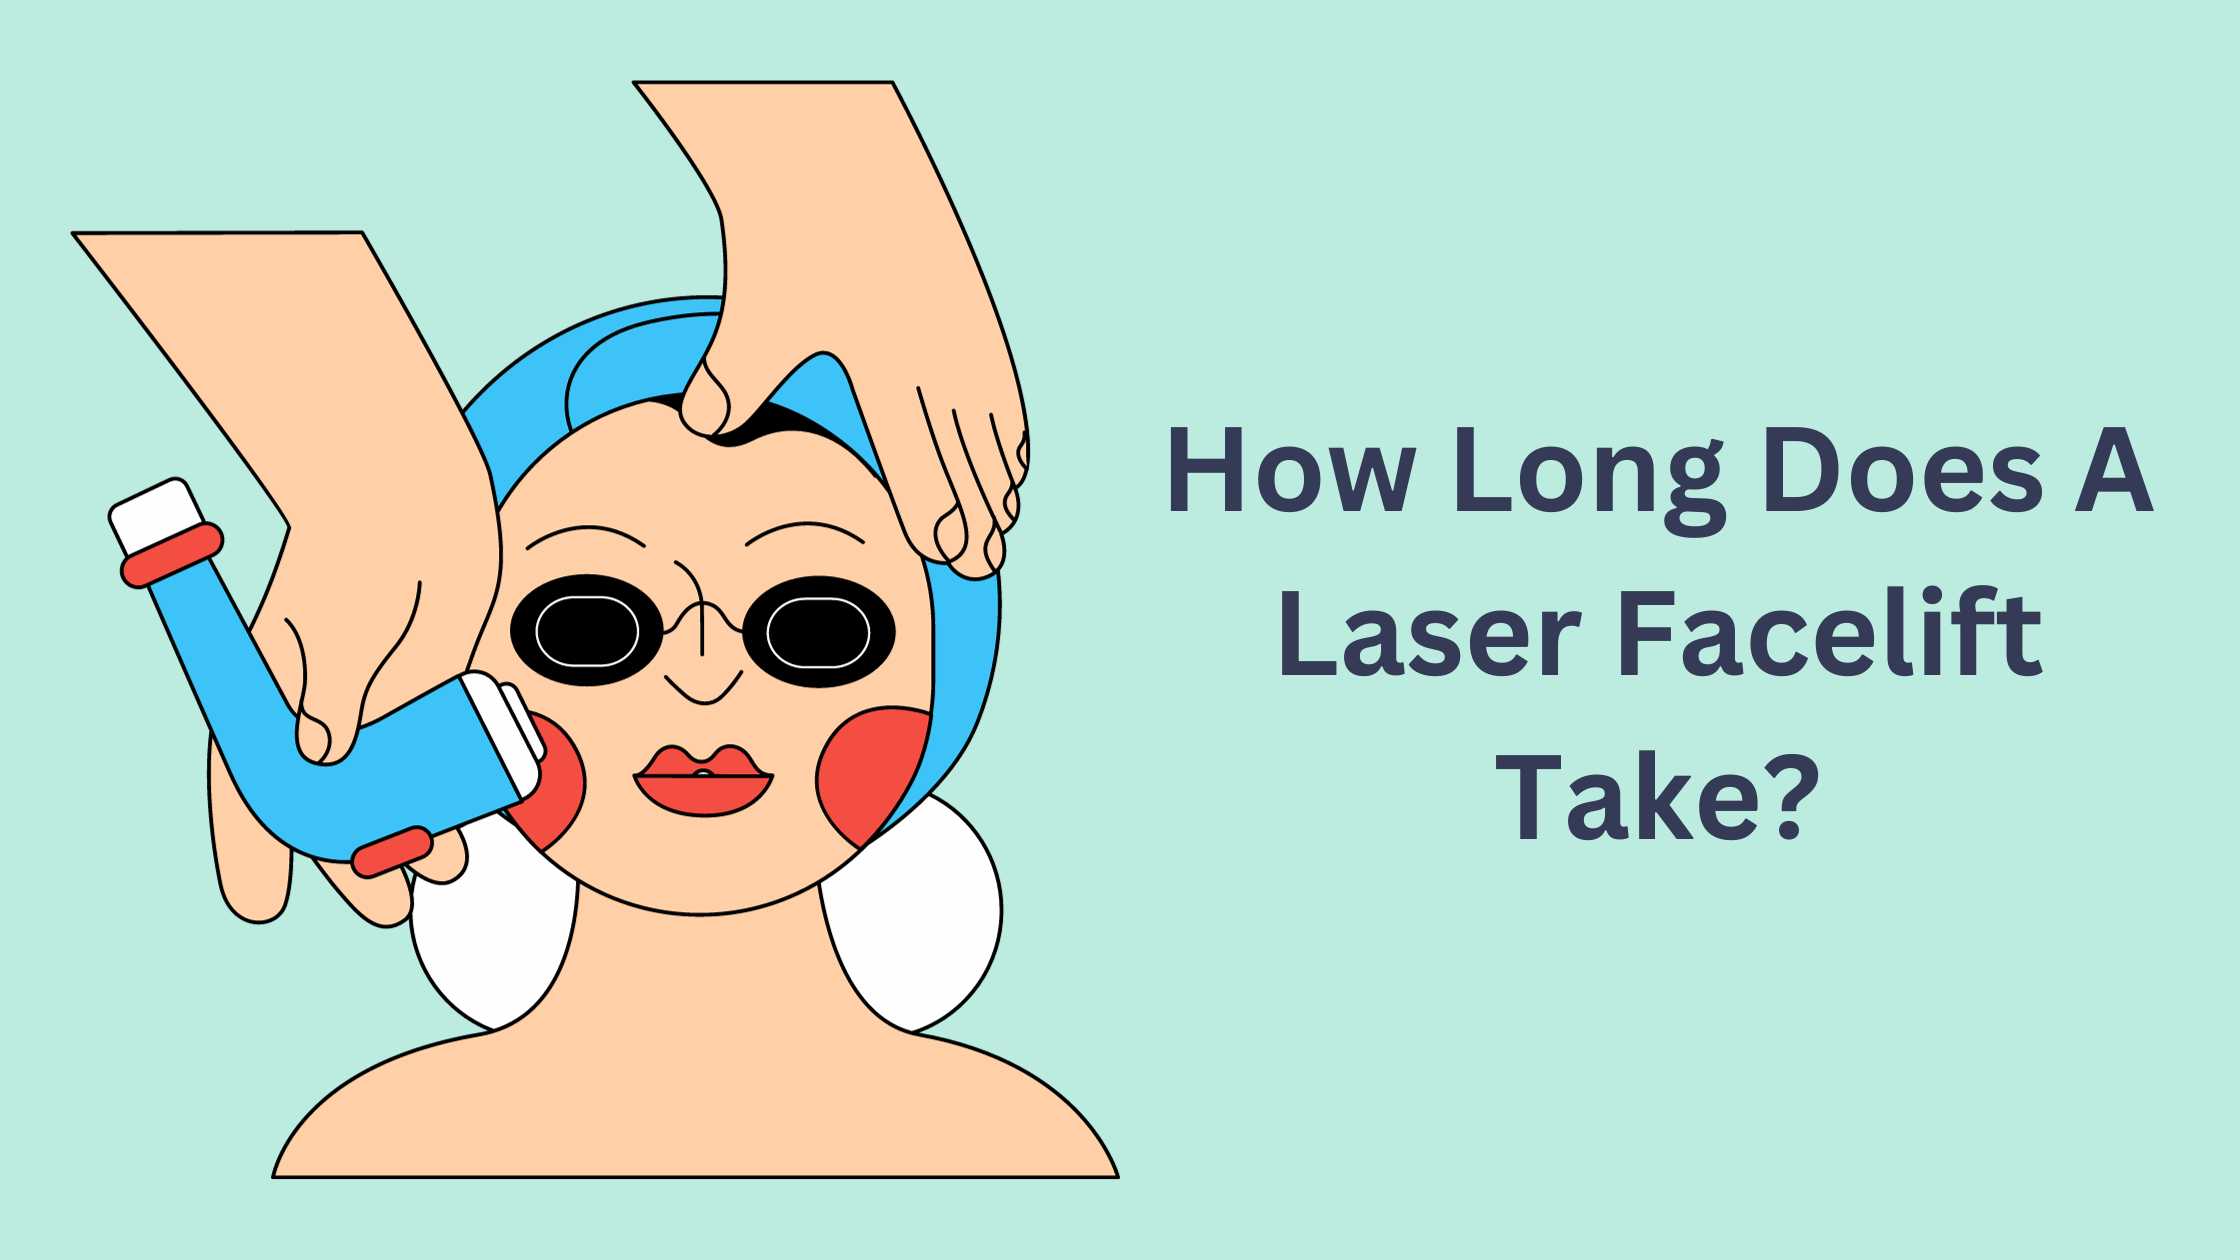 How Long Does A Laser Facelift Take?